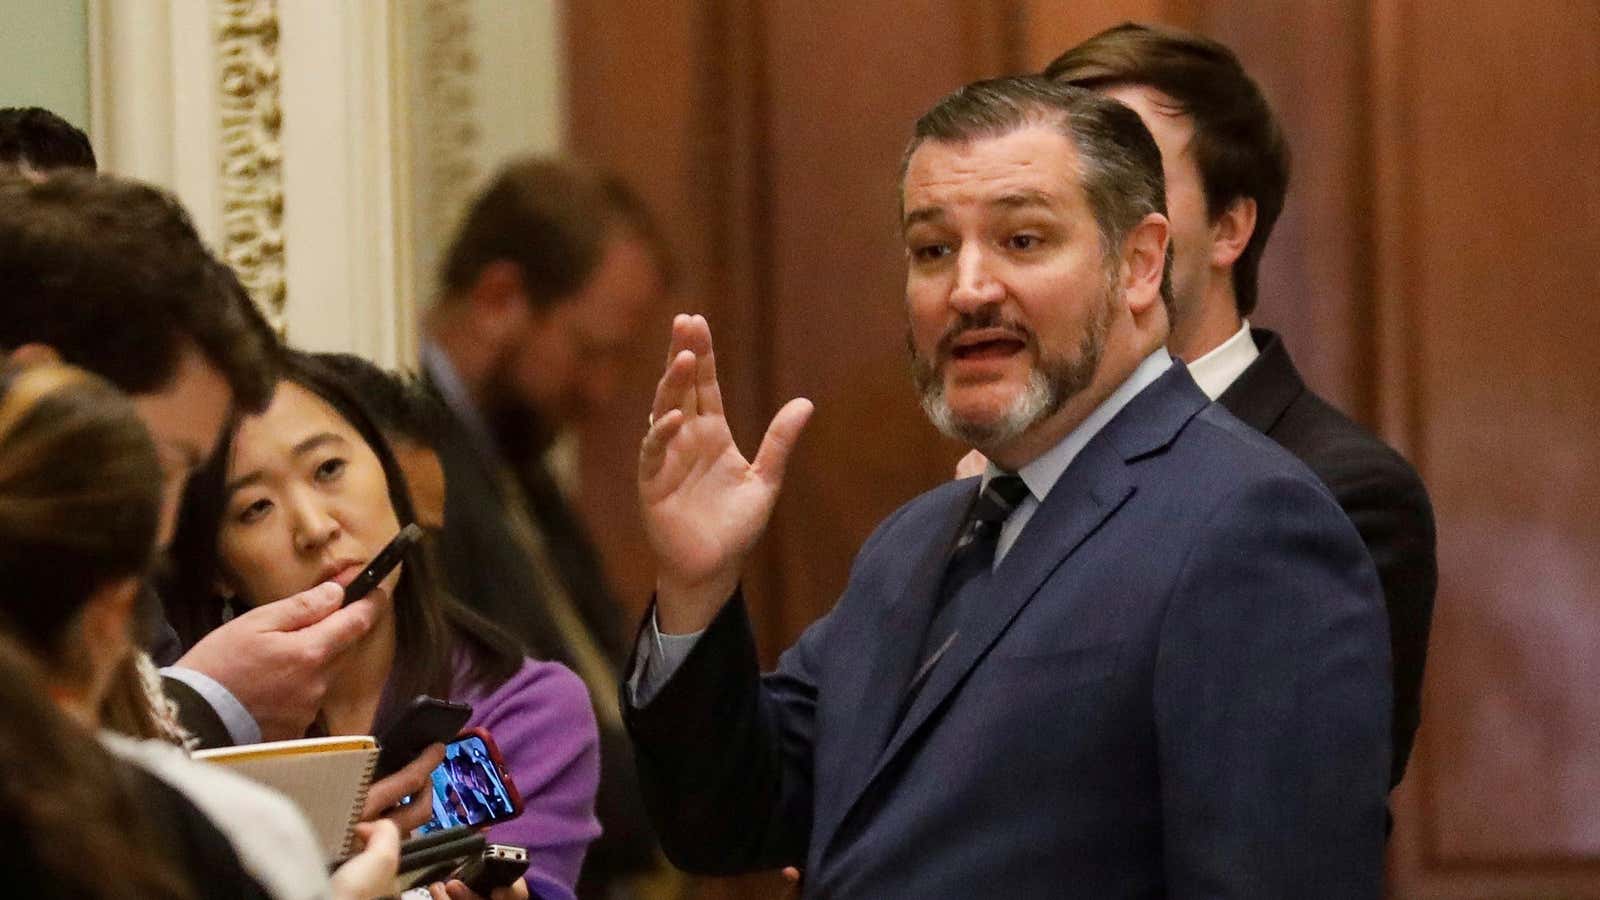 Ted Cruz—and fellow senators—back in the center of attention.